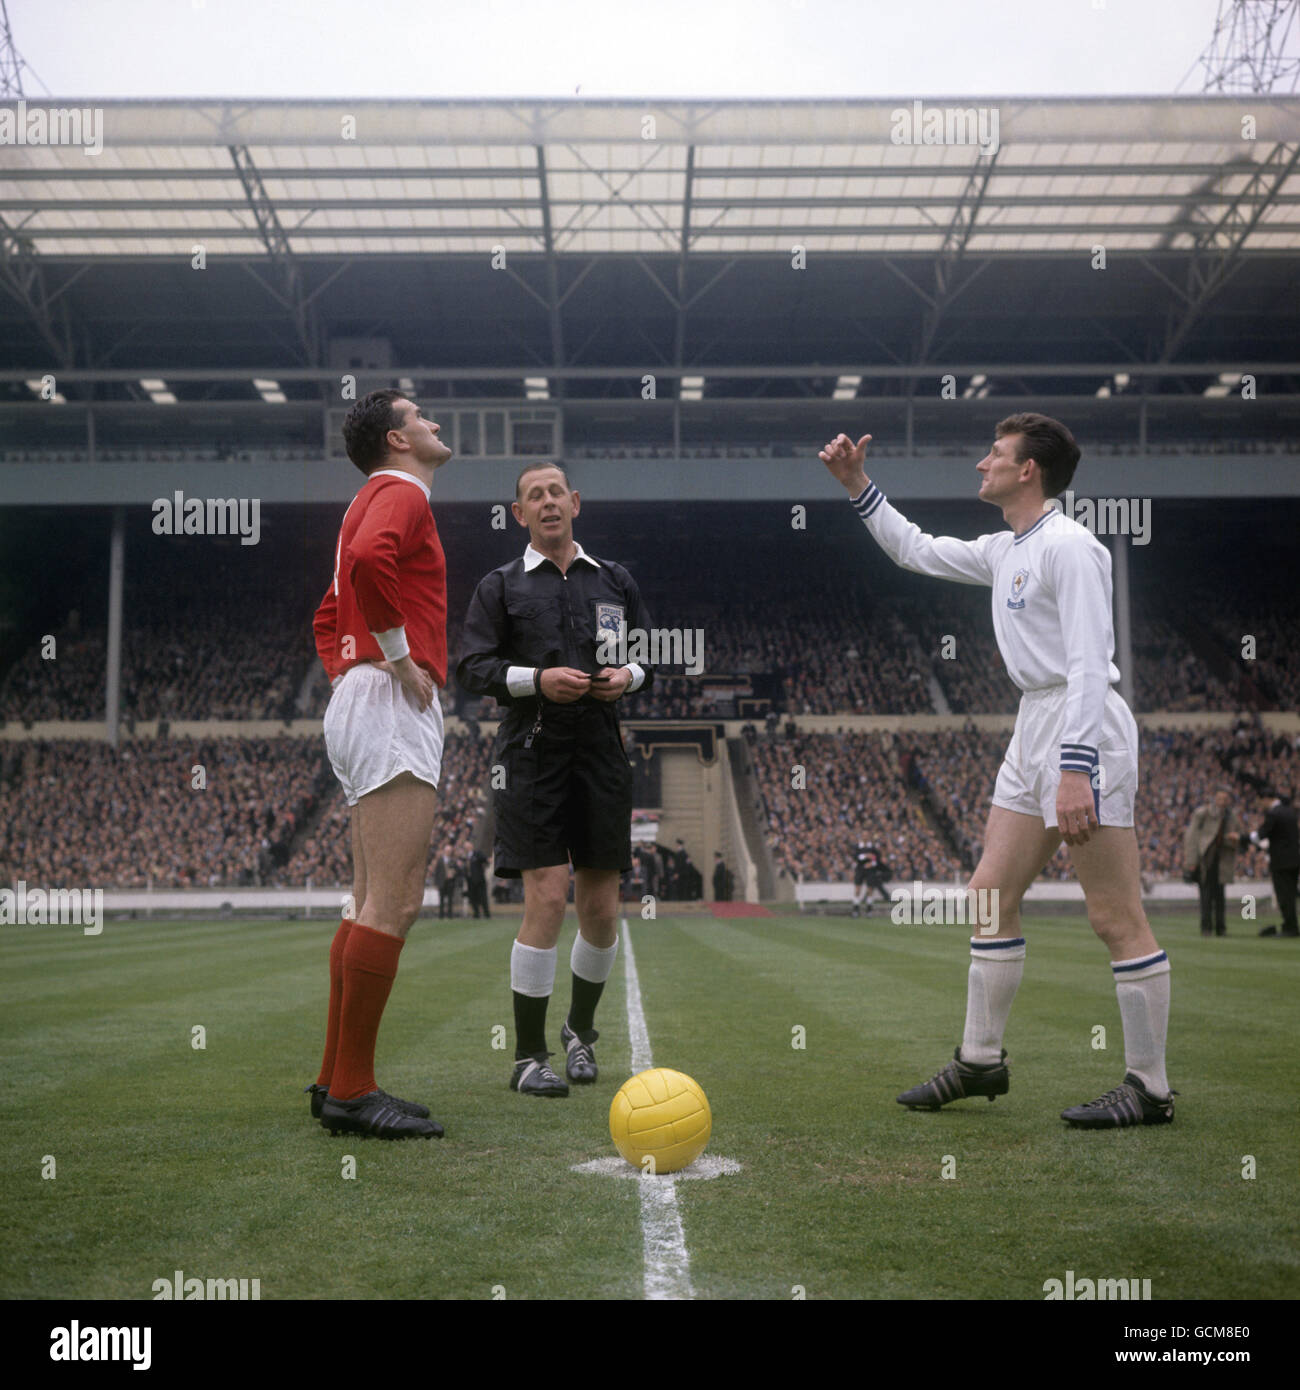 Referee Ken Aston, centre, looks on as captains Noel Cantwell of Manchester United, left, and Leicester City's Colin Appleton toss the coin before the start of the match Stock Photo